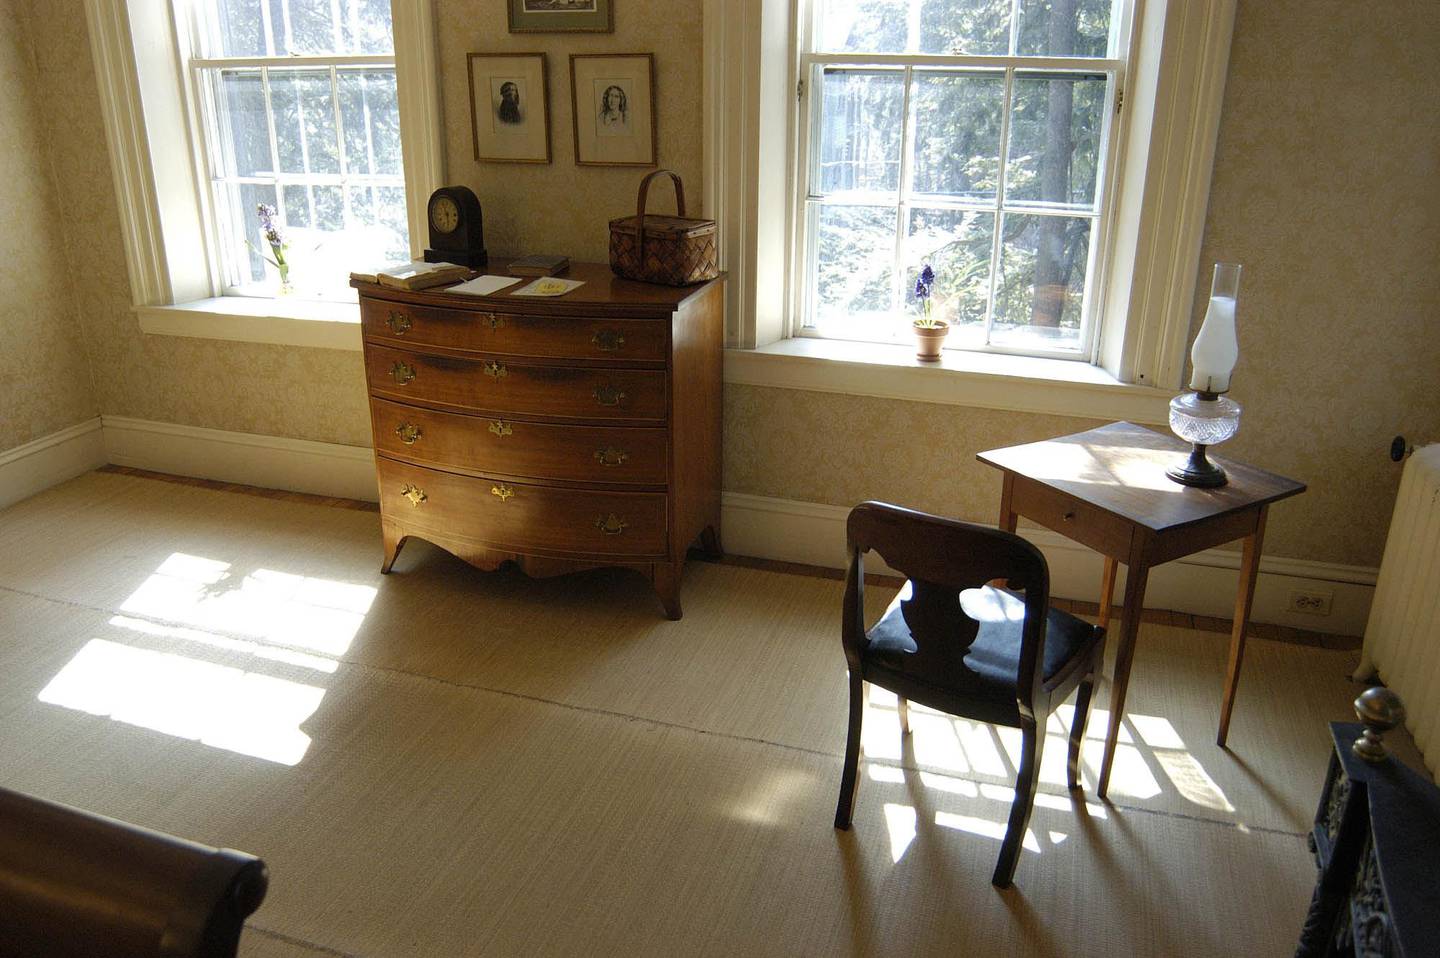 The home bedroom of poet Emily Dickinson, seen Wednesday, March 24, 2004  in Amherst, Mass., will be the site to celebrate National Poetry Month the first week in April 2004, as the town pays tribute to Dickinson with a marathon reading of all of the famous poet's works. (AP Photo/Dennis Vandal)